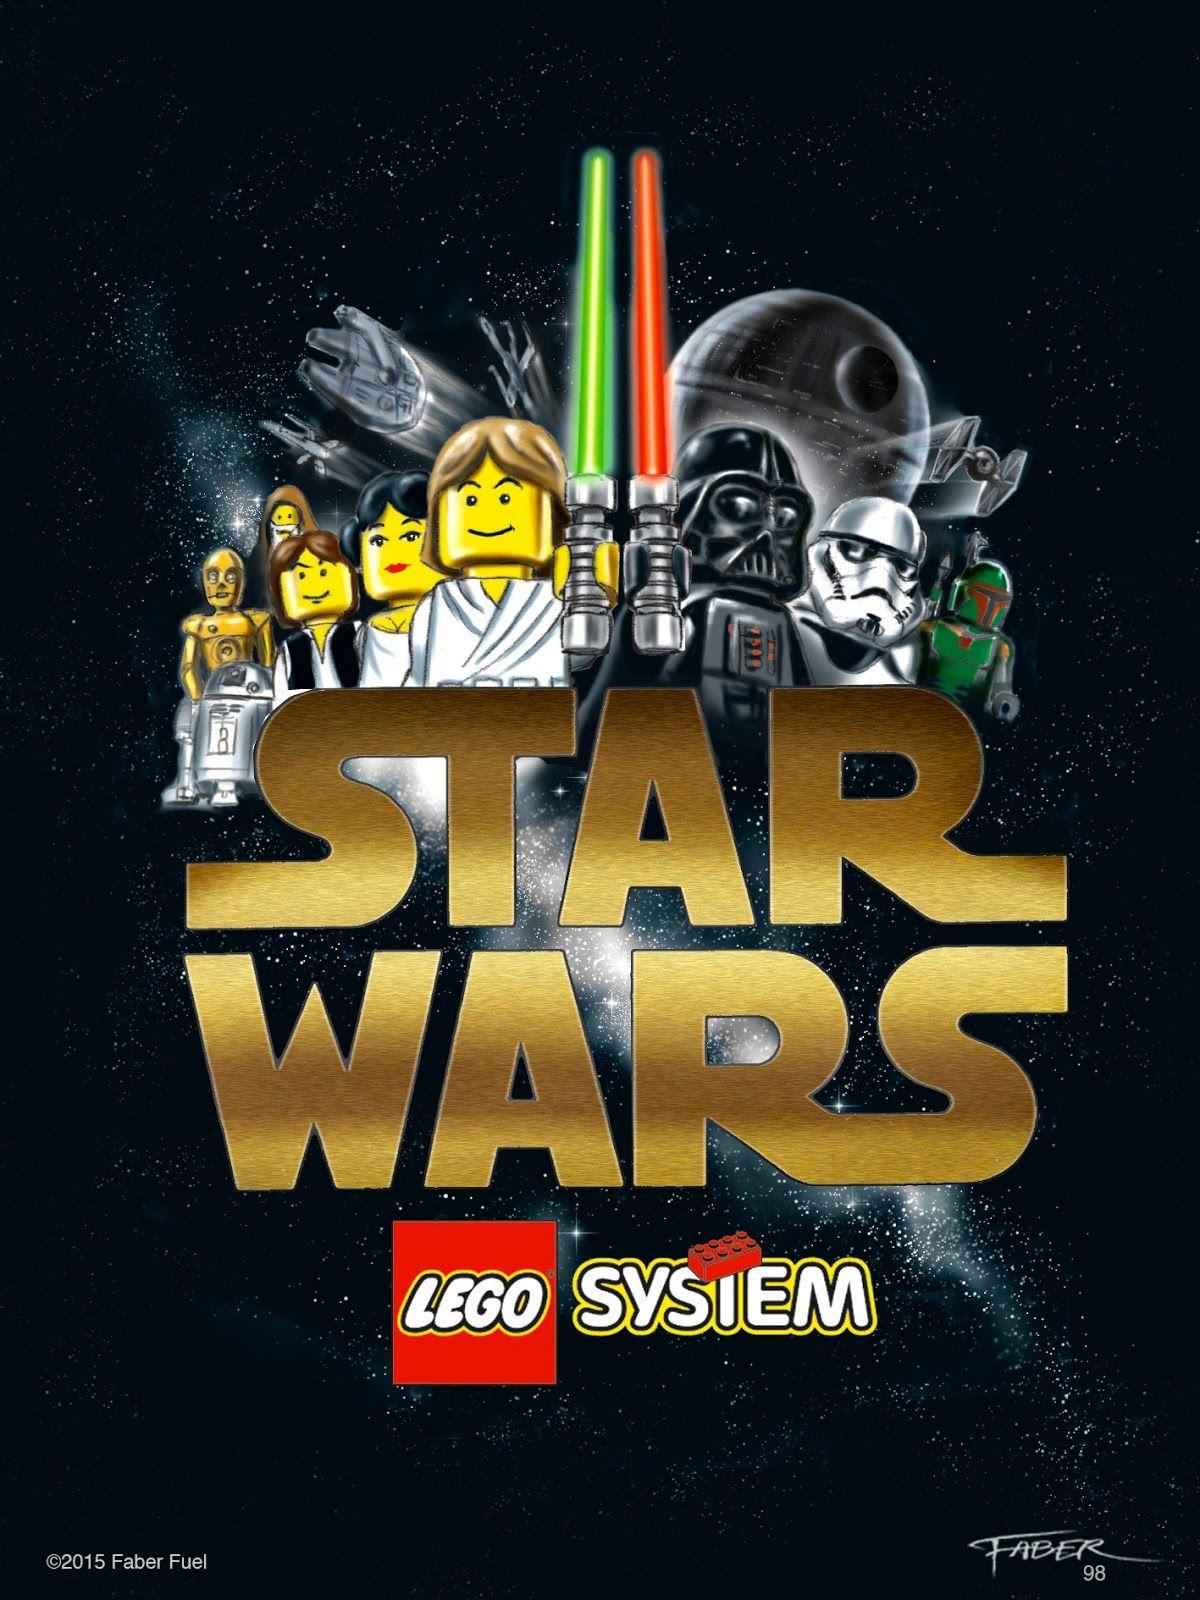 LEGO Star Wars Logo - Faber Files: Flashback - The LEGO and Star Wars collaboration - part 1